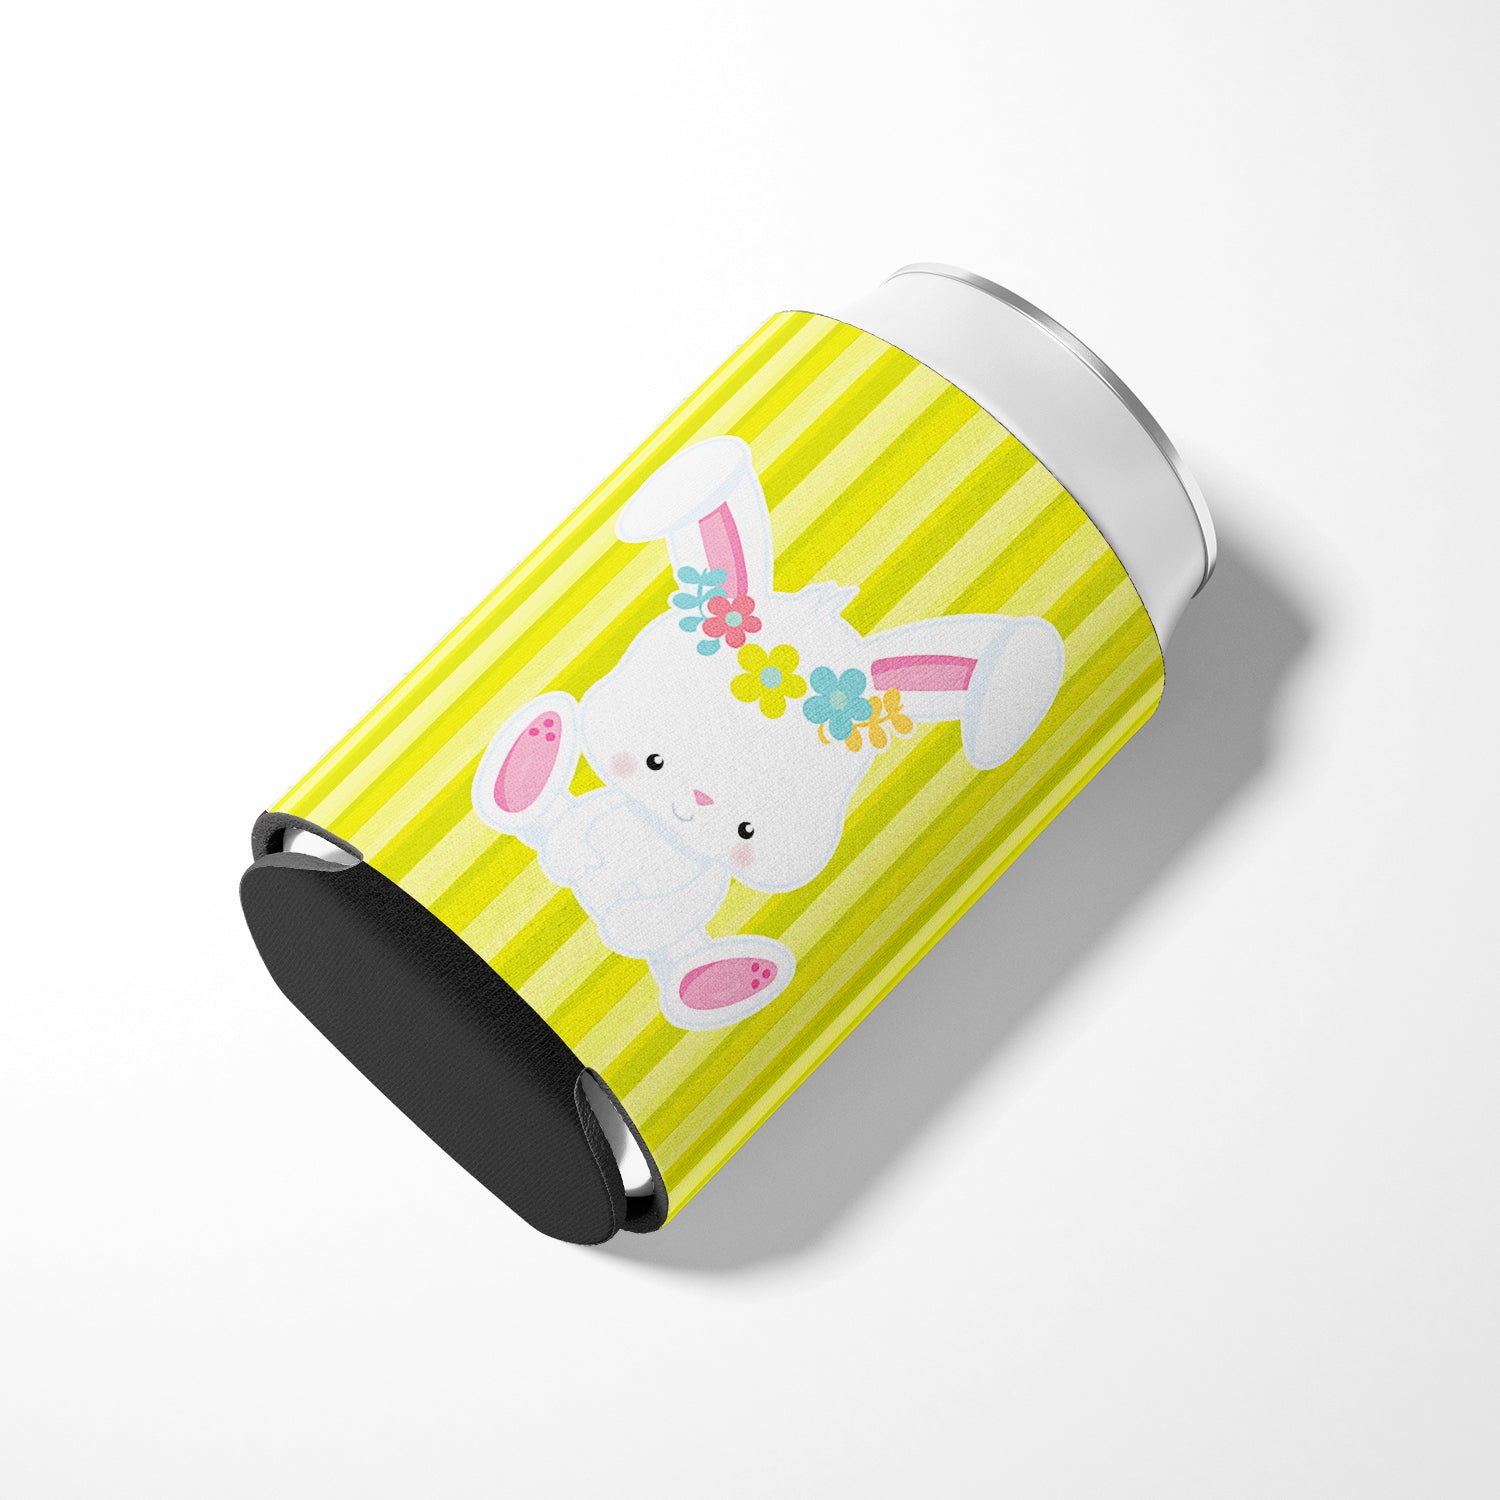 Easter White Rabbit with Flowers Can or Bottle Hugger BB7093CC